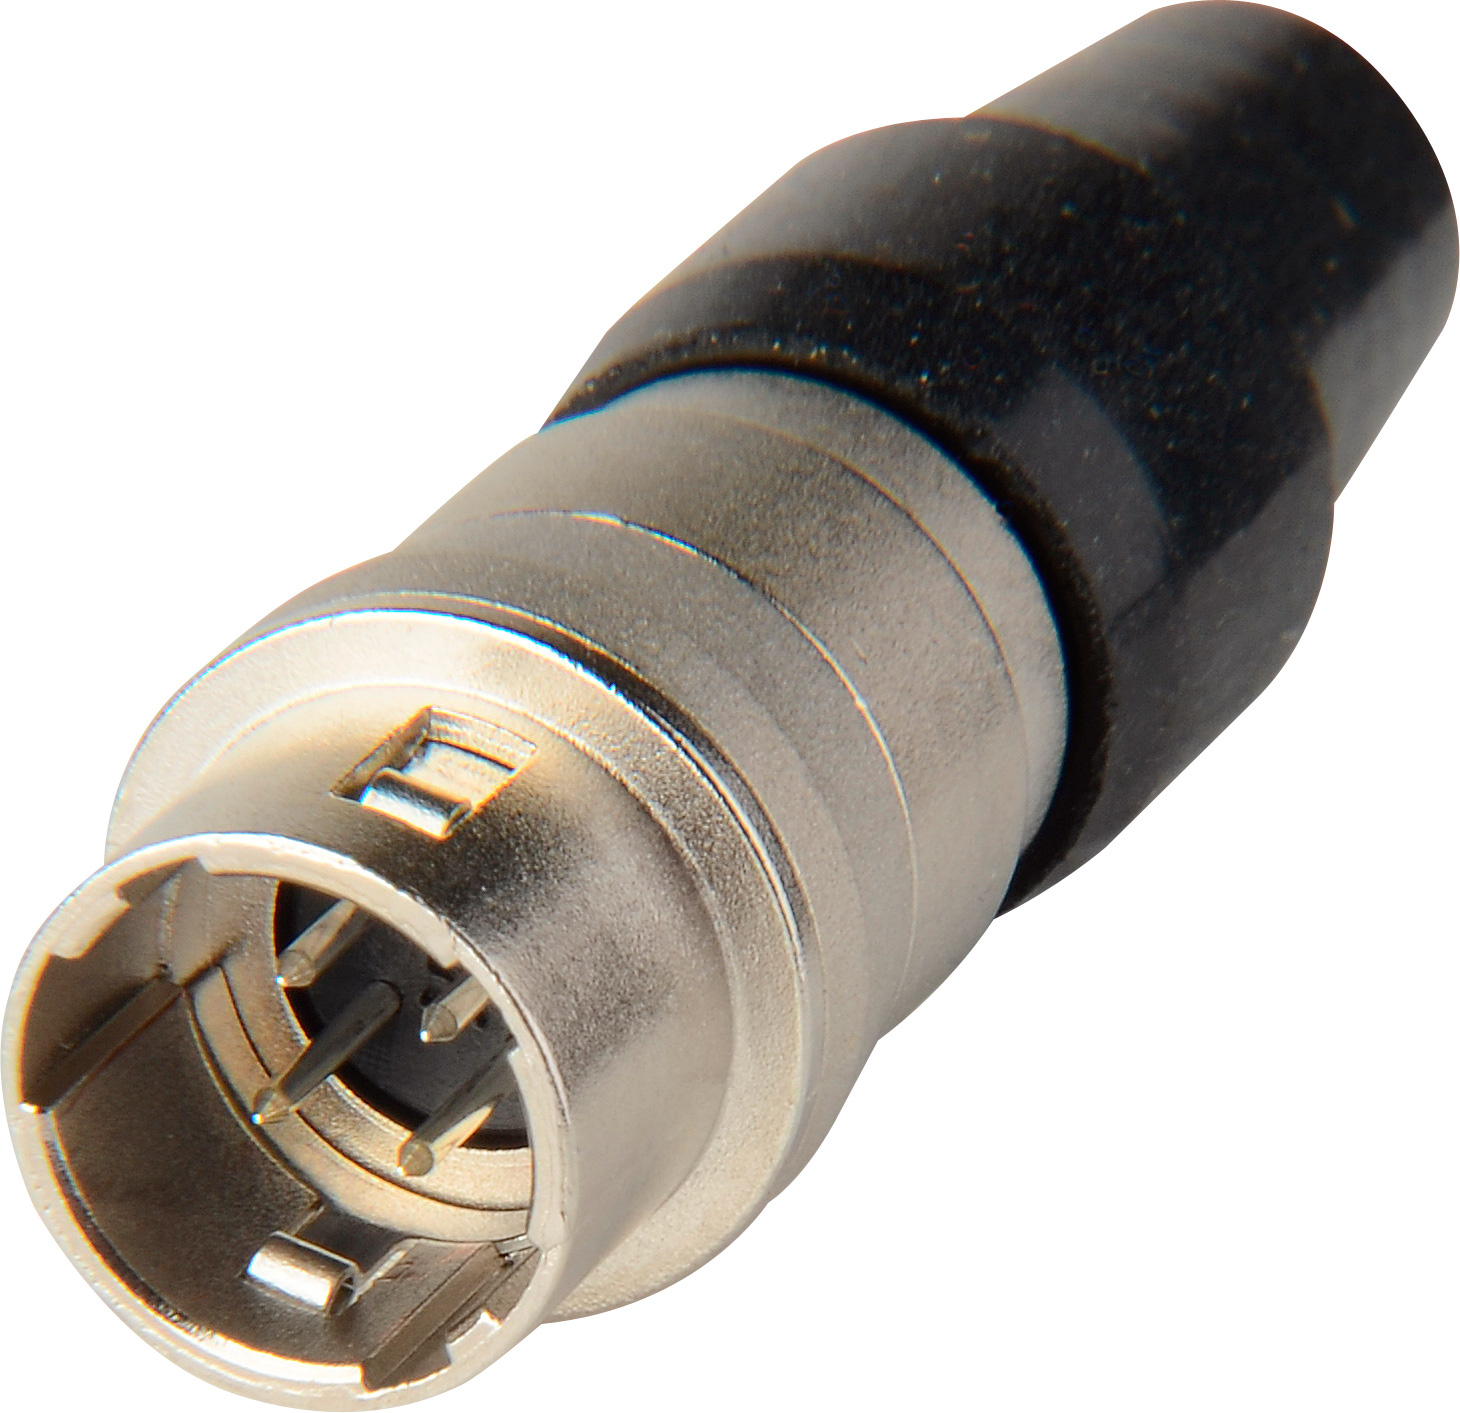 Hirose HR10A-7J-4P 4-Pin Male Push-Pull Connector with 7mm Female Shel